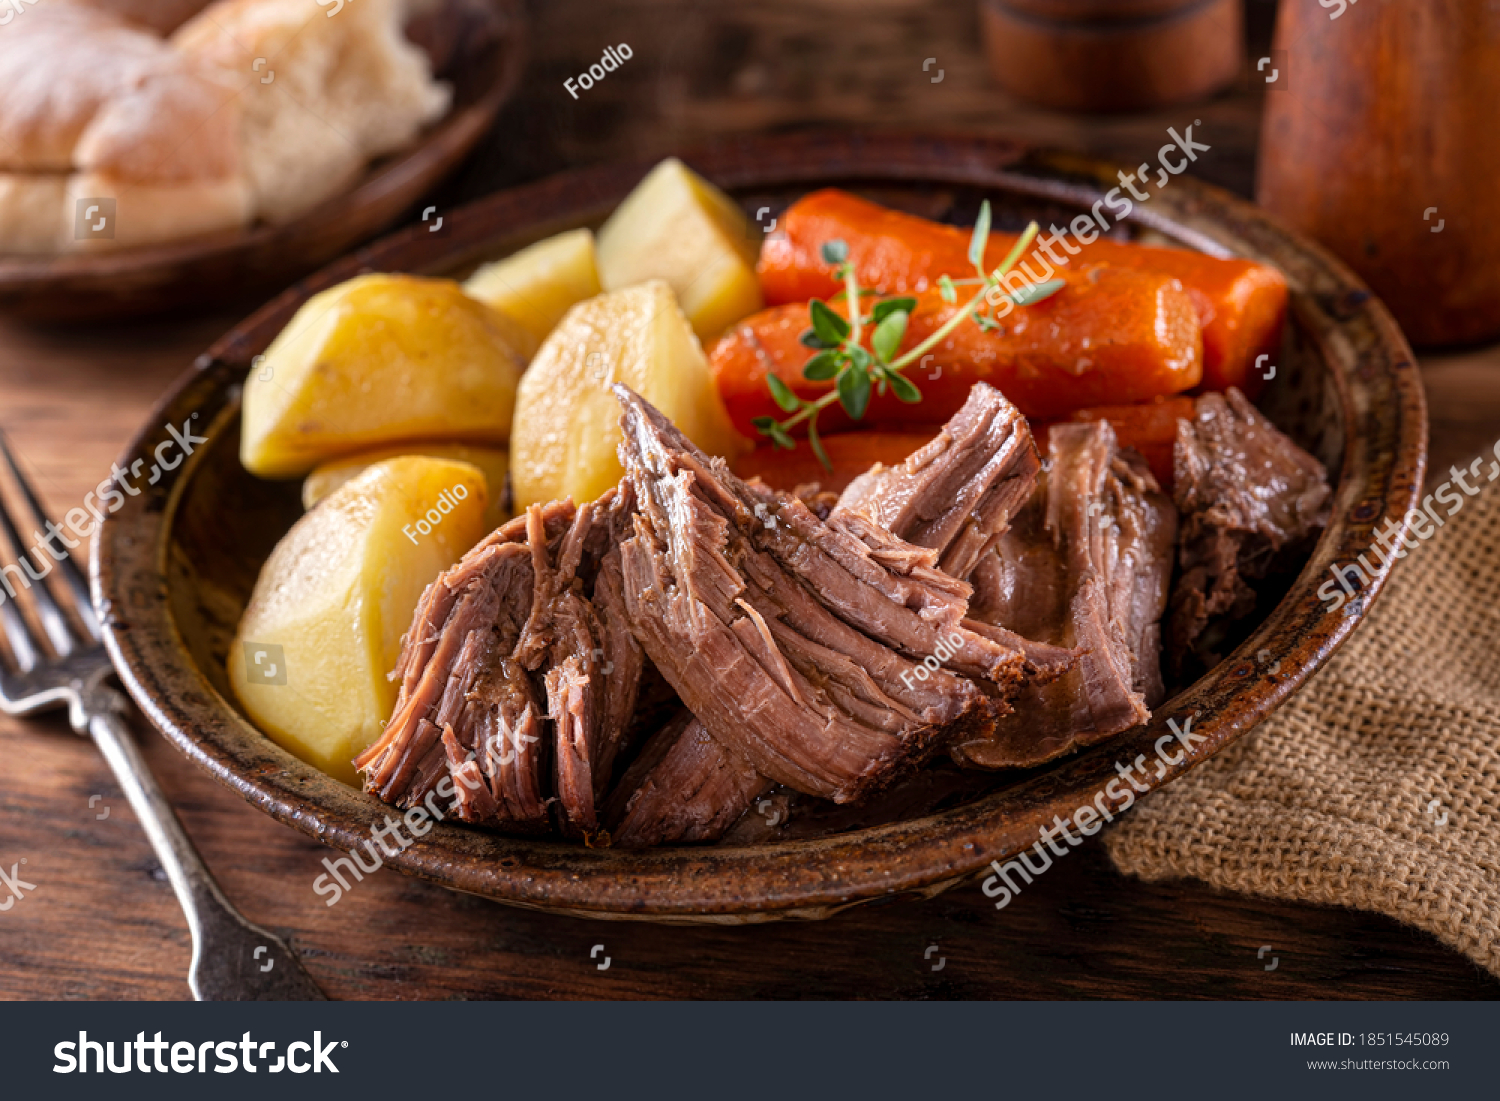 A plate of delicious beef pot roast with potatoes and carrots with thyme garnish. #1851545089